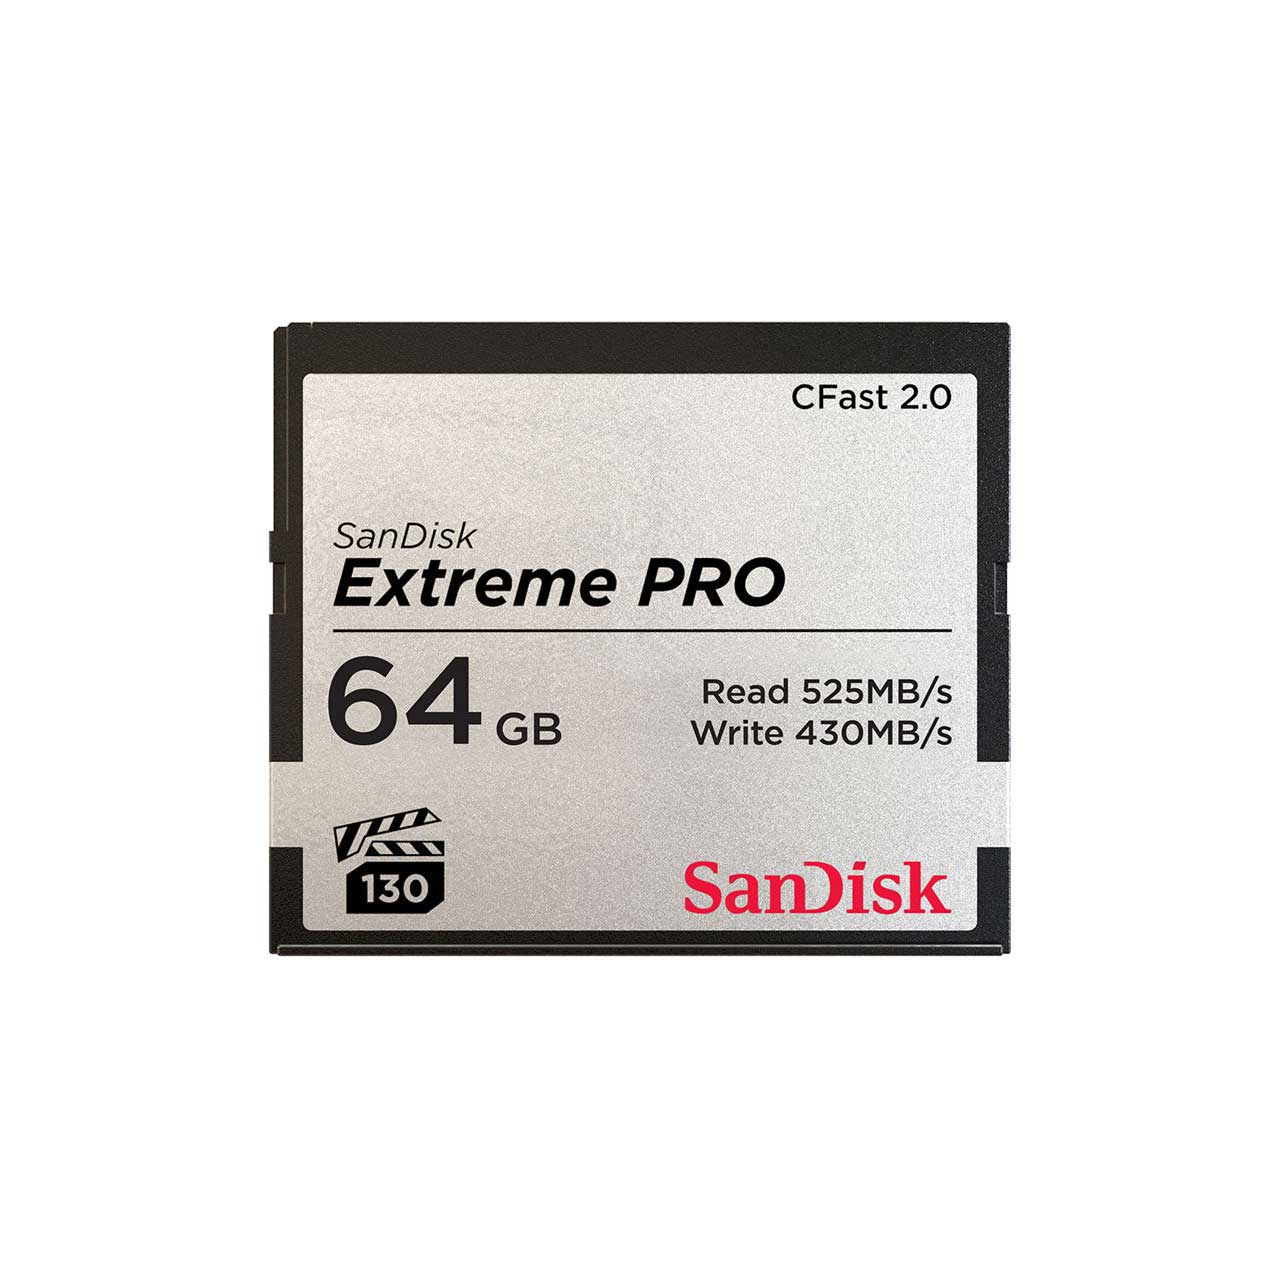 Sandisk SDCFSP-064G-A46D Extreme Pro CFast 2.0 Memory Card - 64GB